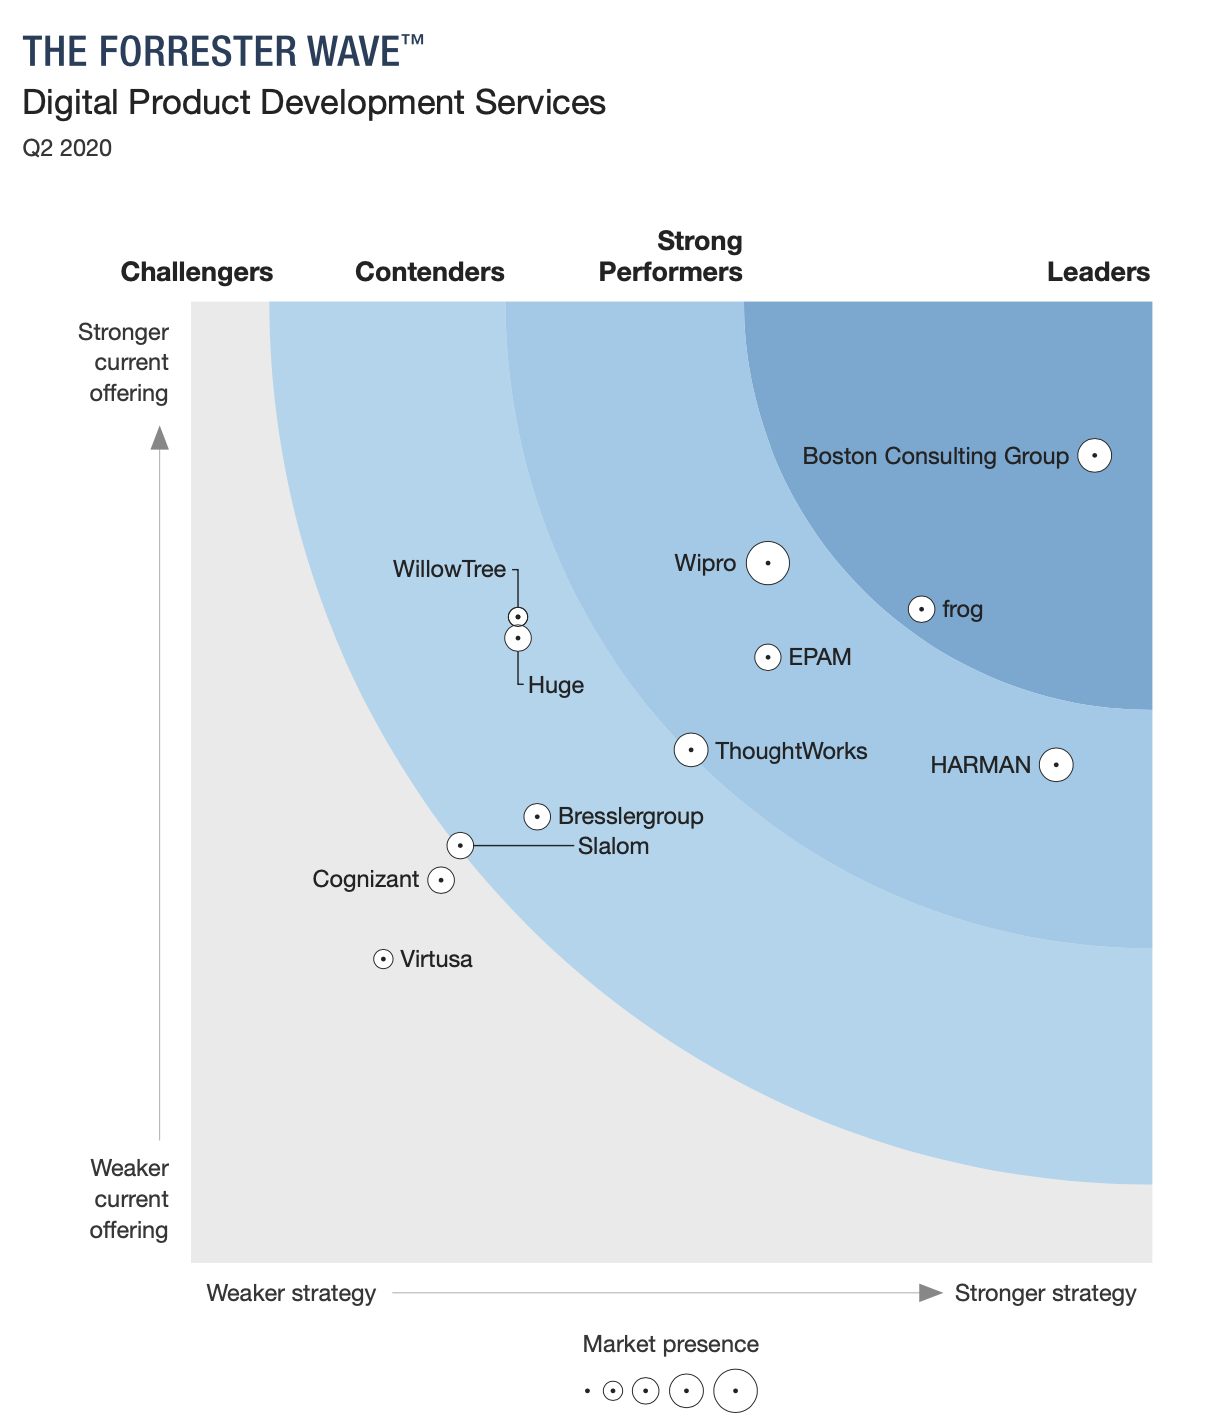 Wipro identified as one of the most Significant Providers of Digital Product Development Services in ‘The Forrester Wave™: Digital Product Development Services, Q2 2020'